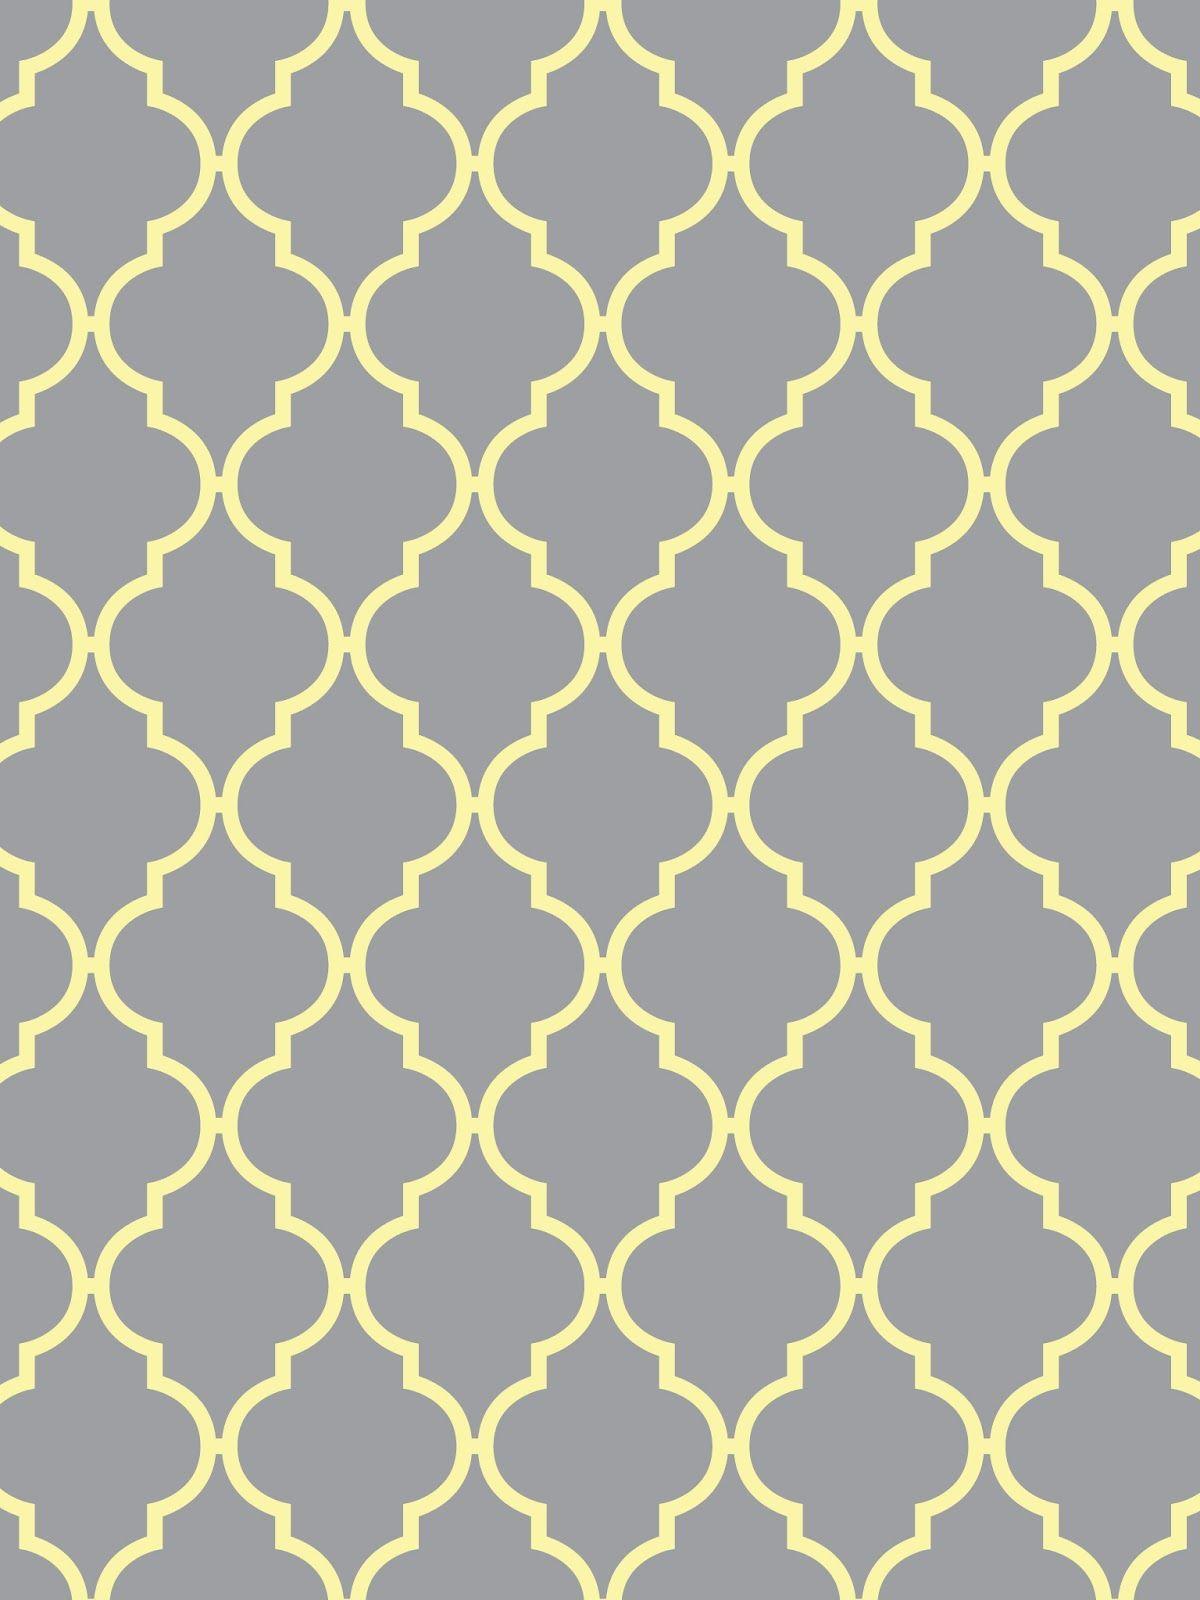 NextWall Retro Yellow And Gray Floral Vinyl Peel  Stick Wallpaper Roll  Covers 3075 Sq Ft NW35203  The Home Depot